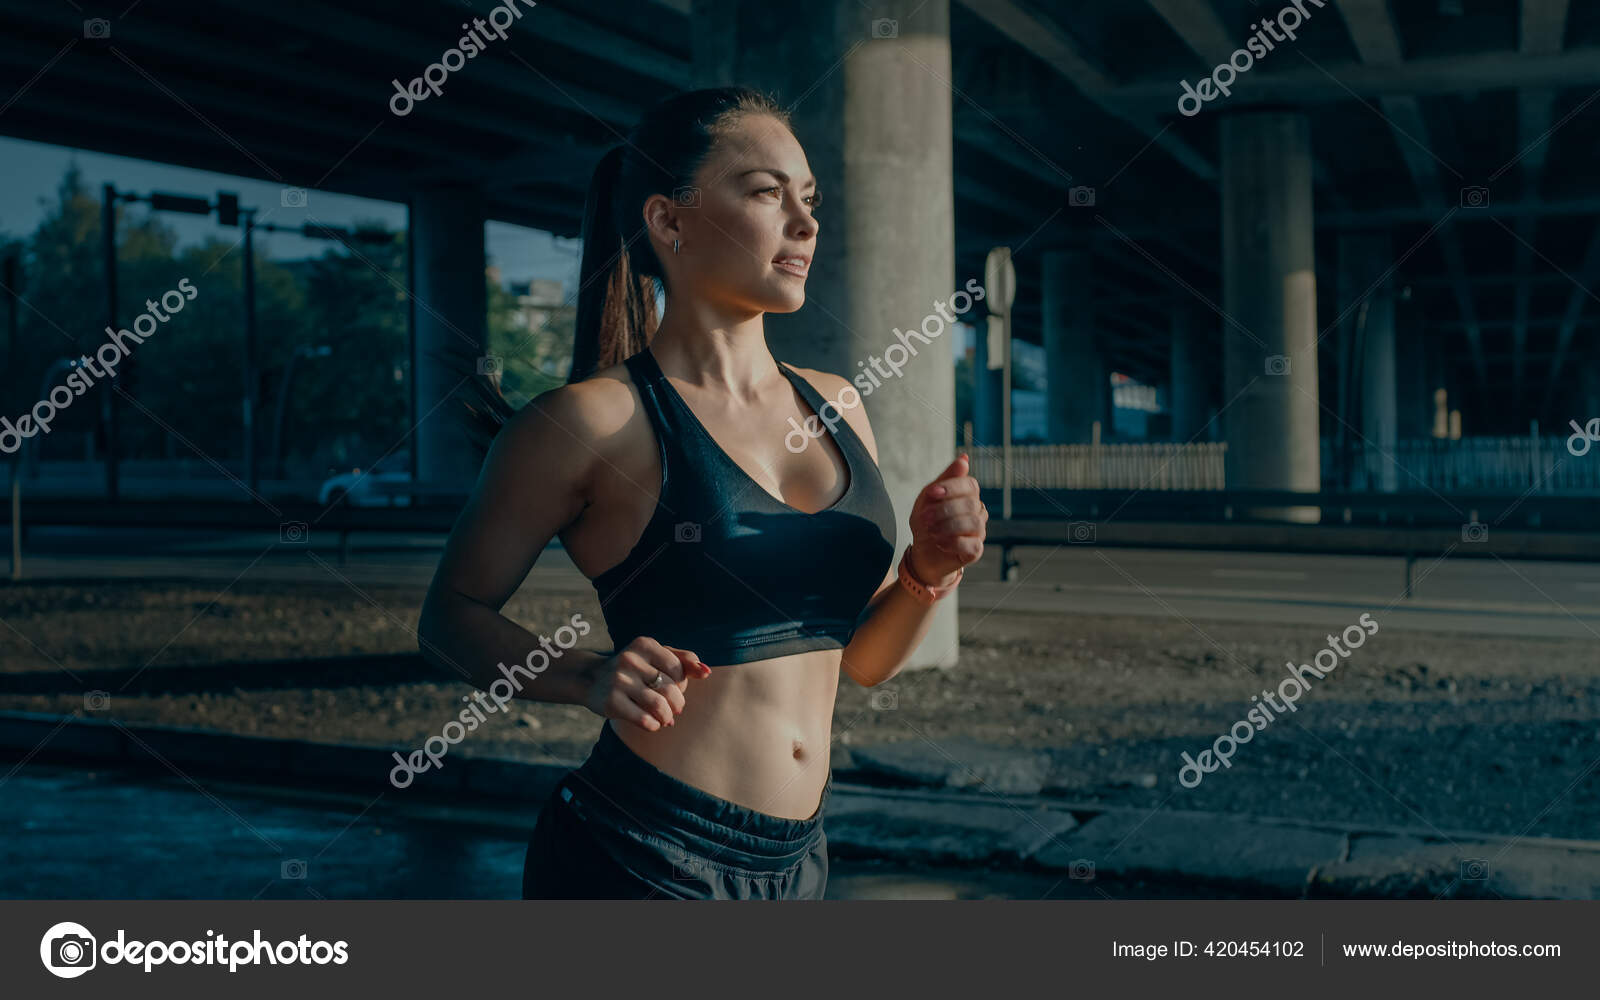 Retrato Shot of a Beautiful Fitness Girl in Black Athletic Top